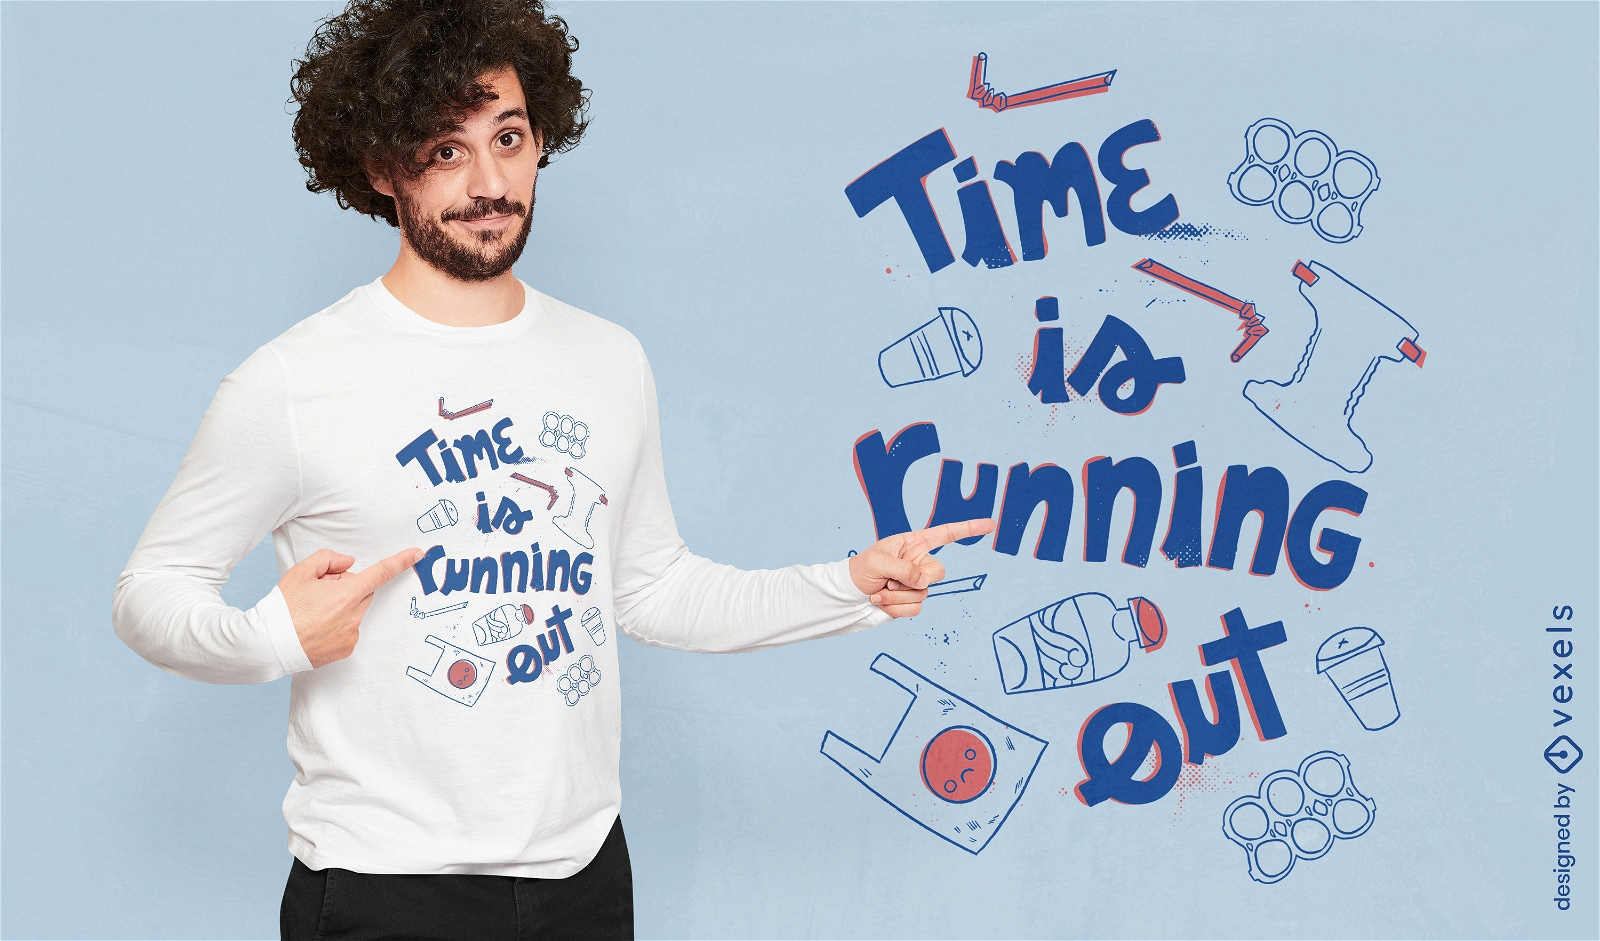 Ecology time is running out quote t-shirt design